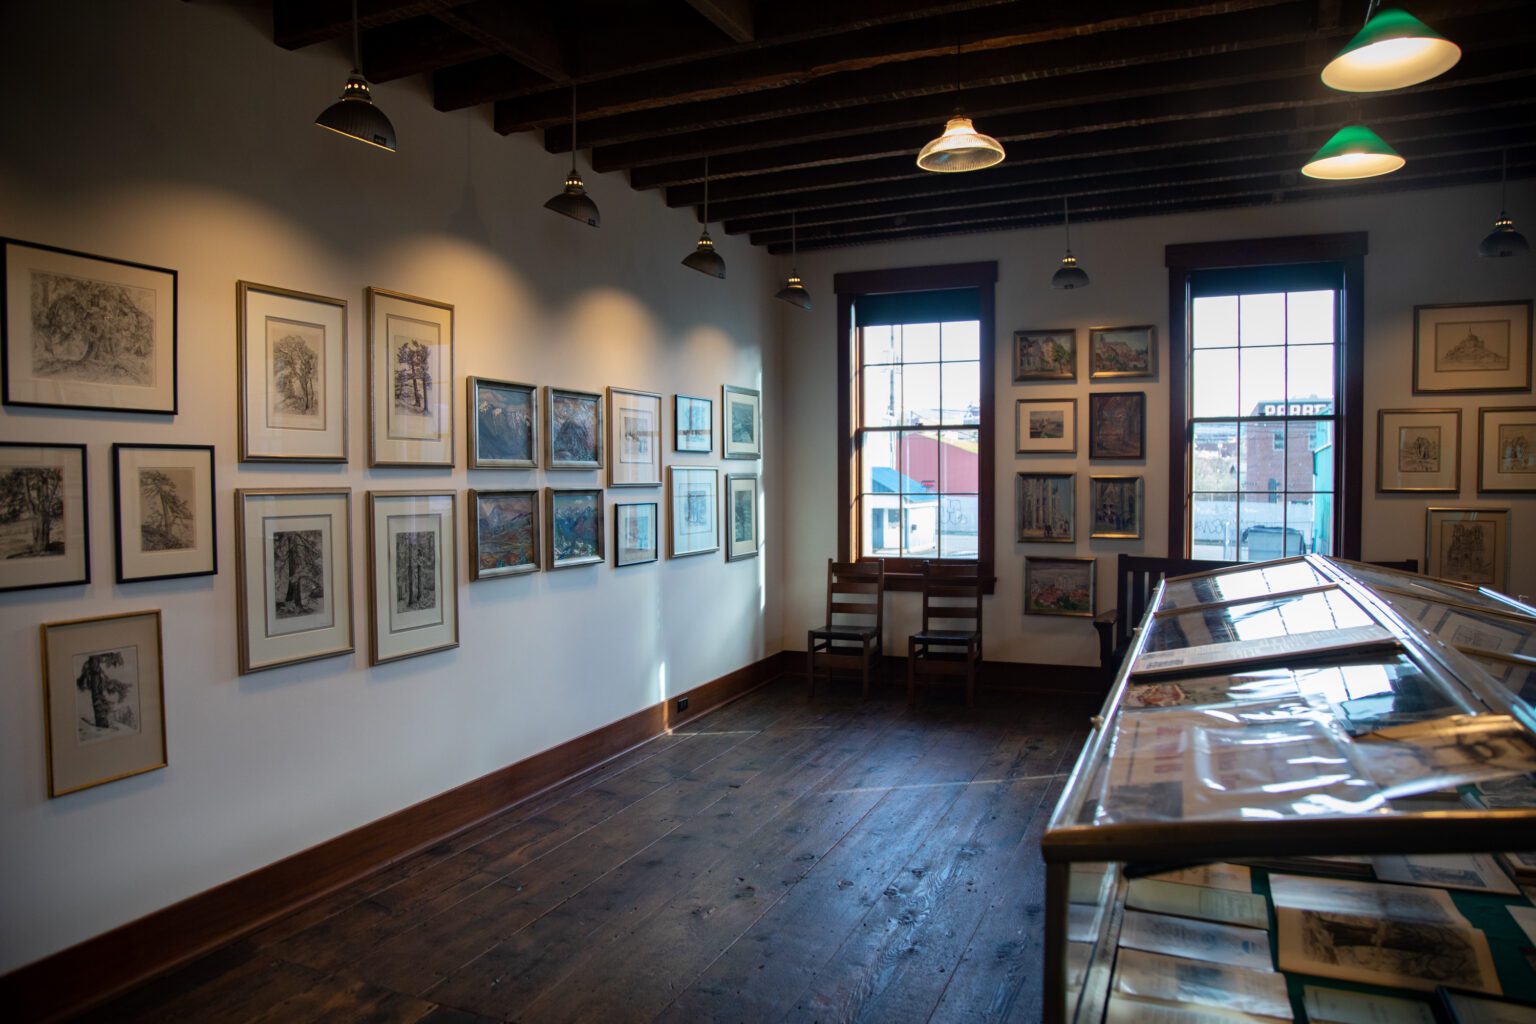 The Helen Loggie Museum of Art in Bellingham's Old Town features etches and sketches by the namesake Bellingham artist. Loggie was born in 1895 and produced many detailed pieces from sketches of trees on Orcas Island to oil paintings of Europe.